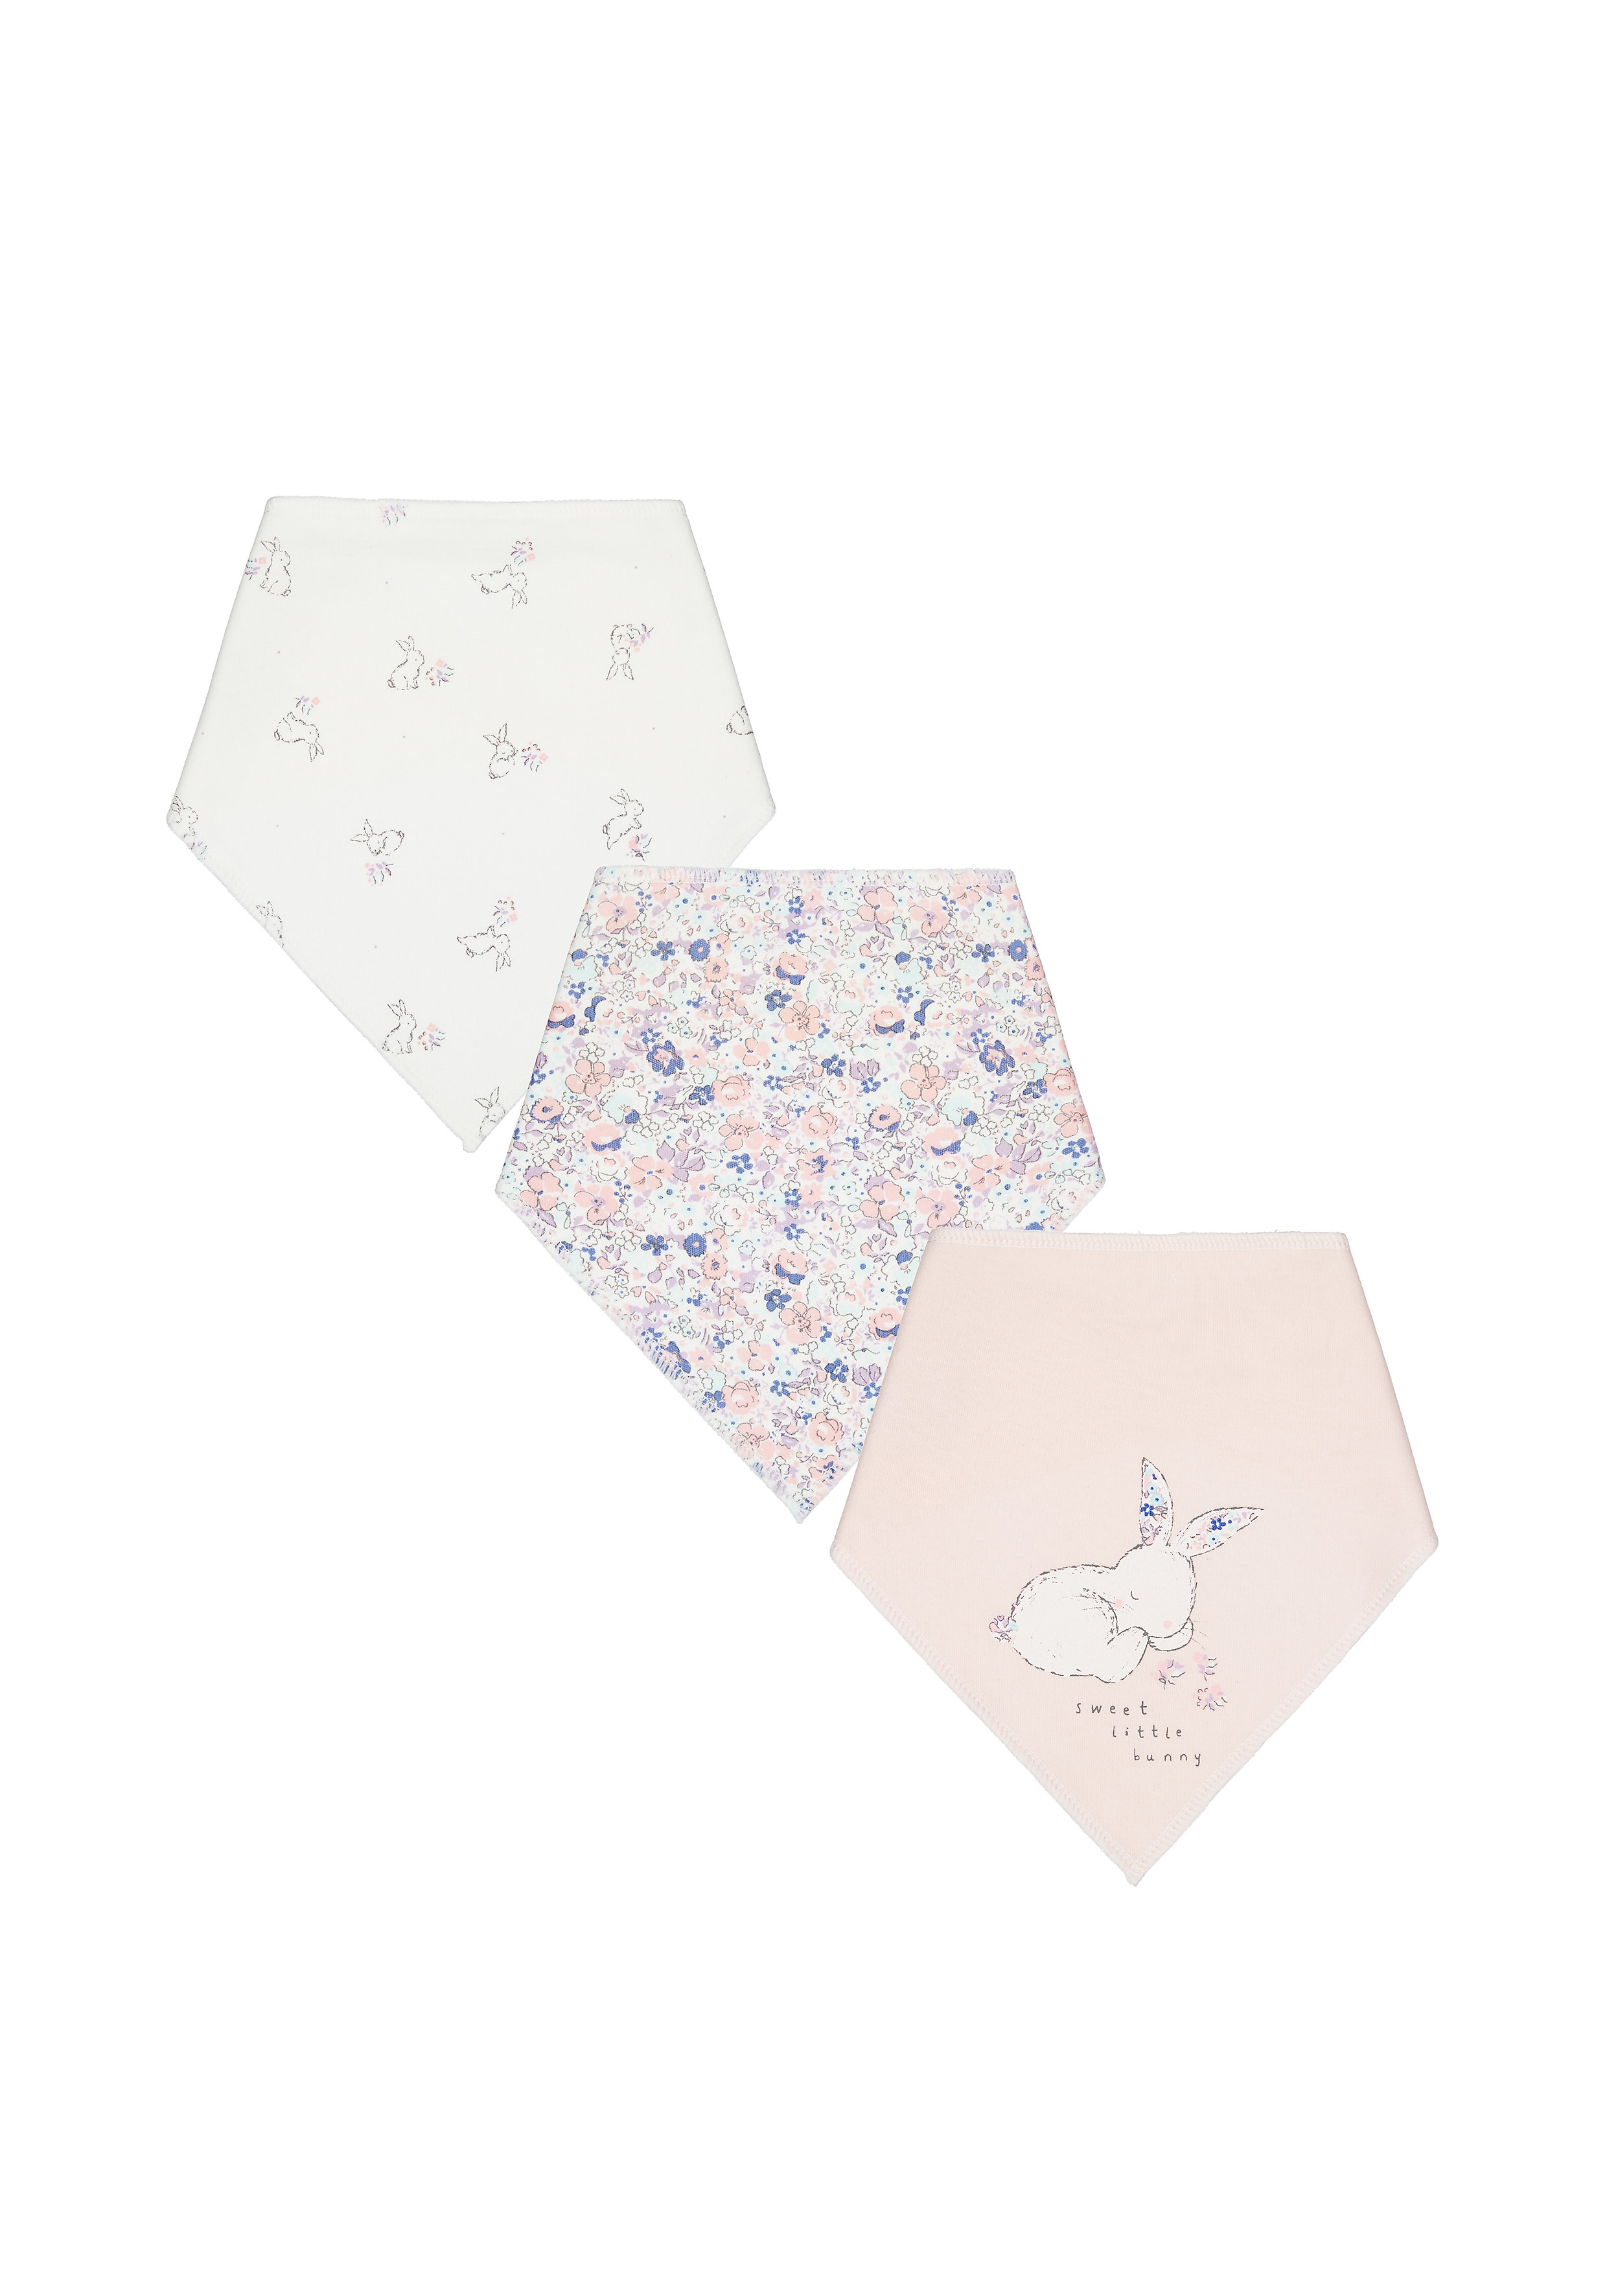 Mothercare | Mothercare Bunny Dribbler Bibs Pink Pack of 3